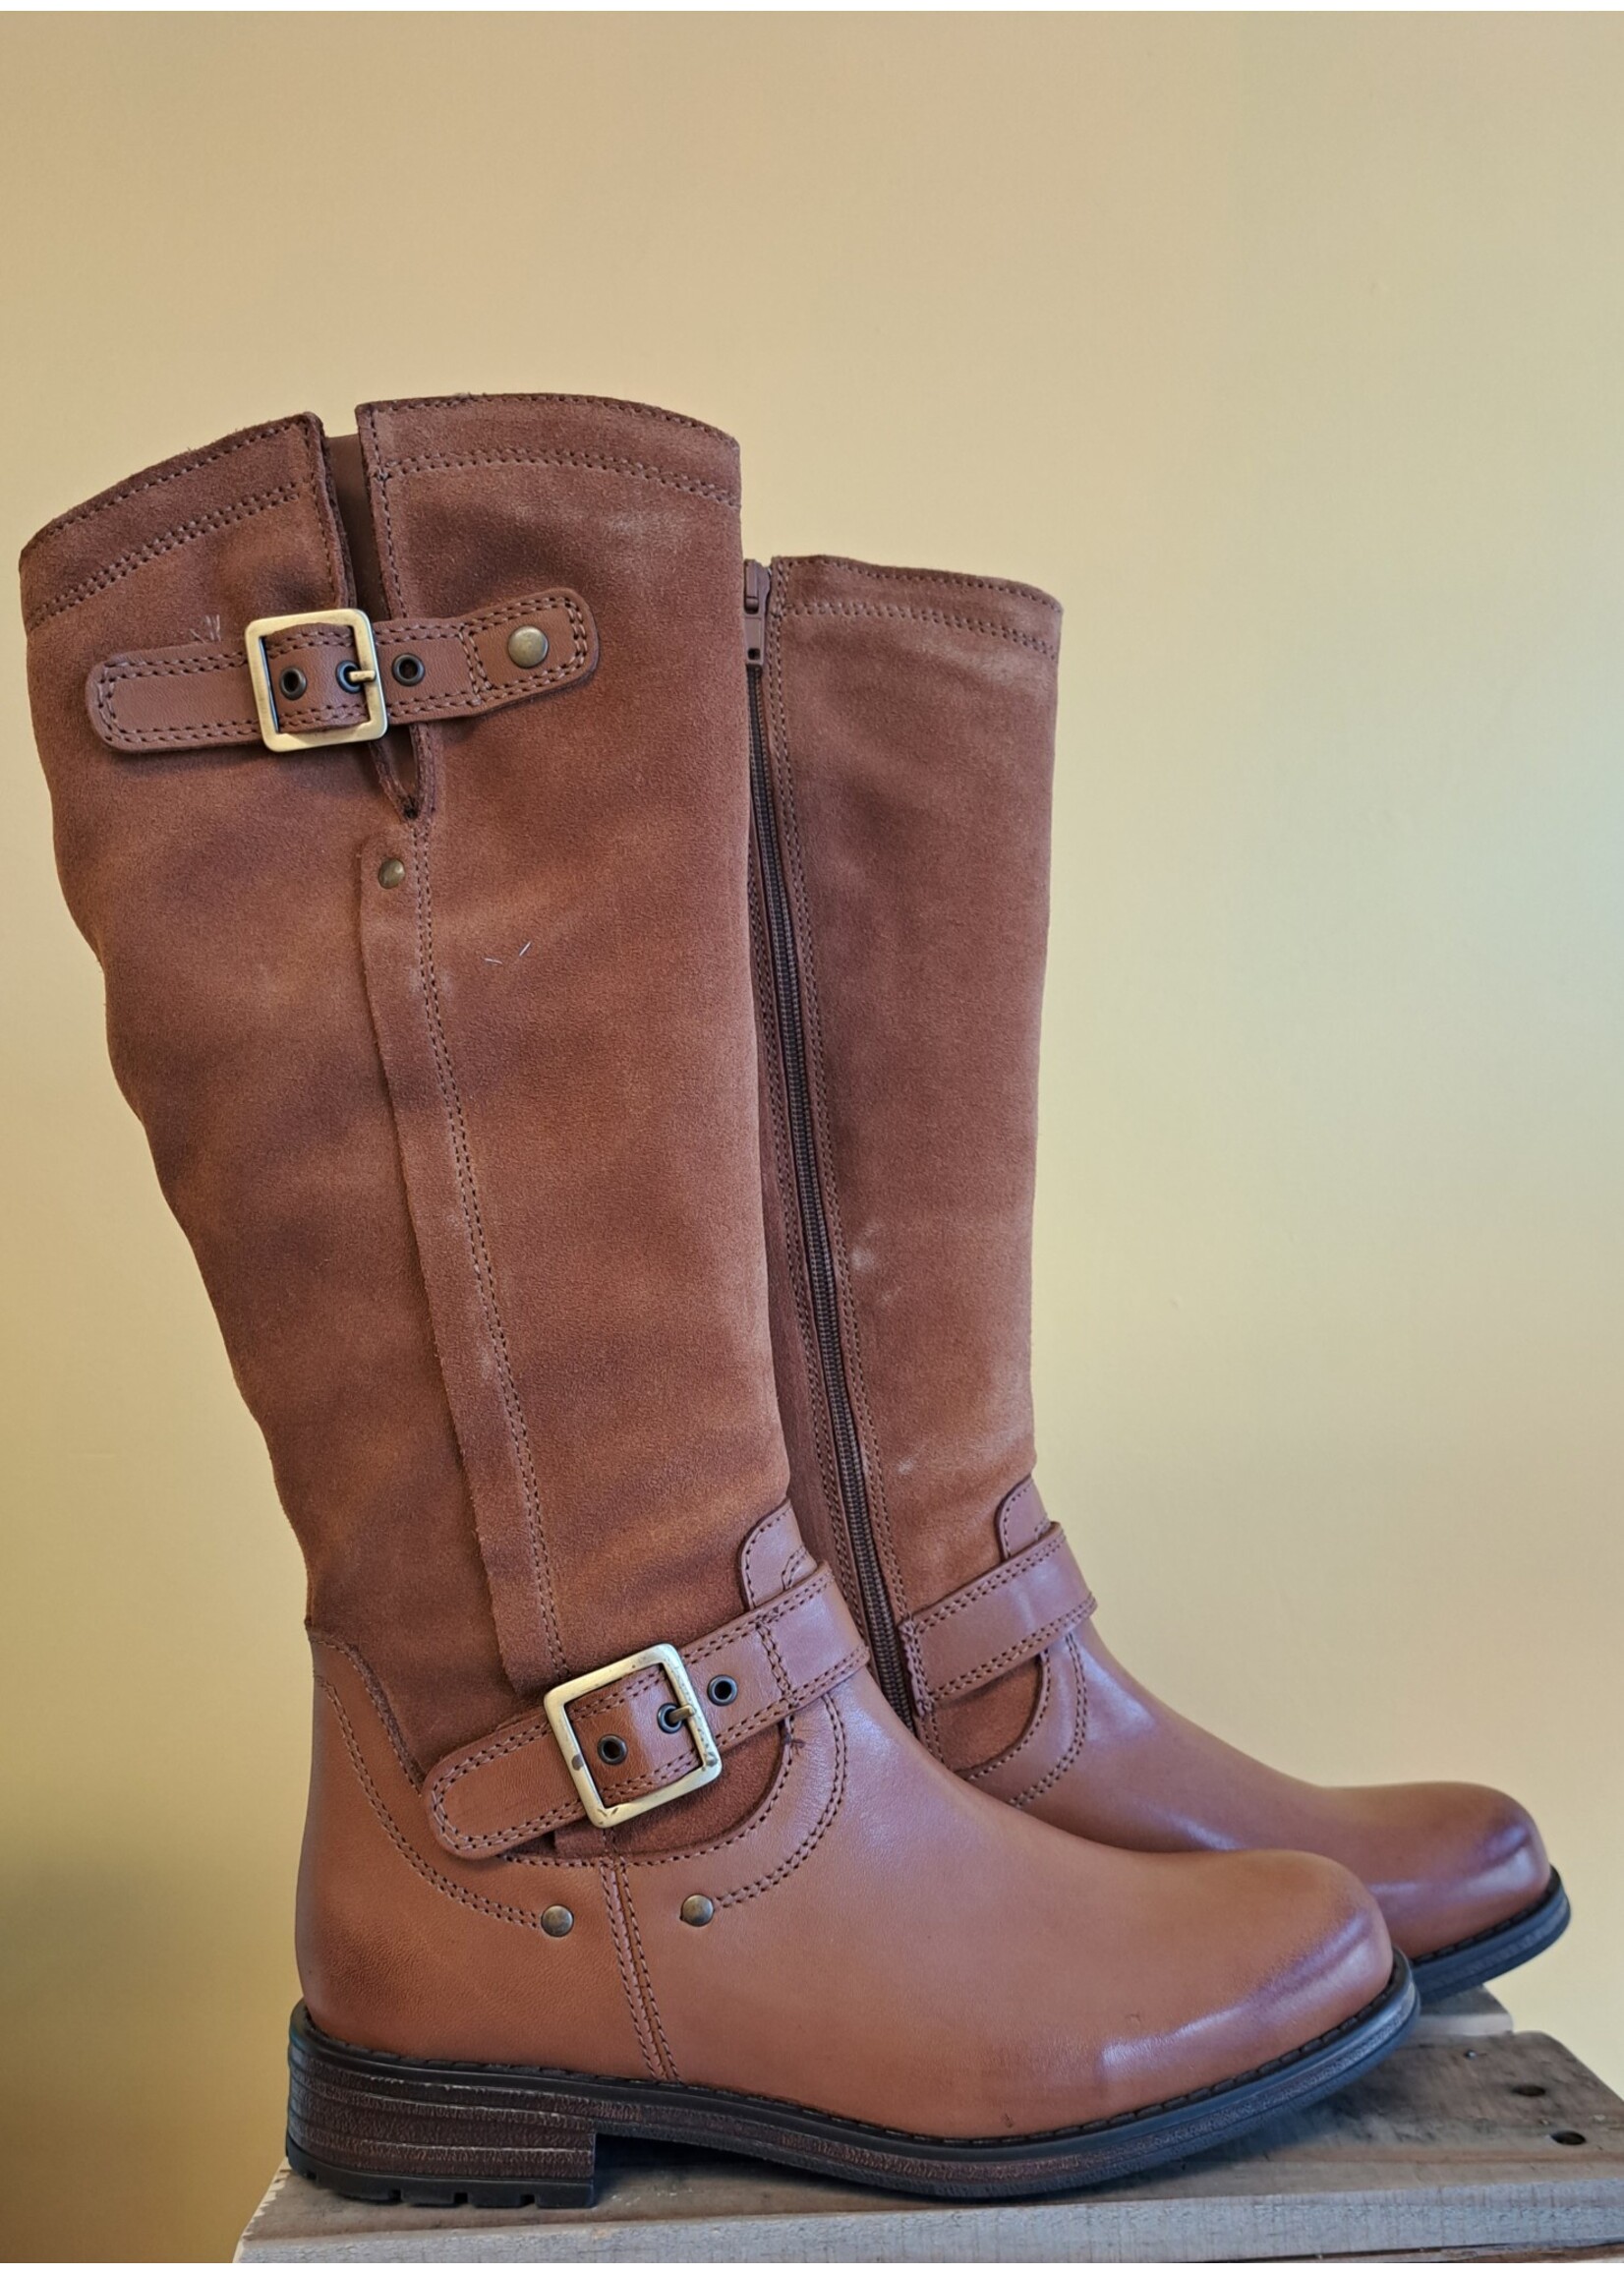 Eric Michael Helena Cognac Suede Leather Combo Boot by Eric Michael 50% Off